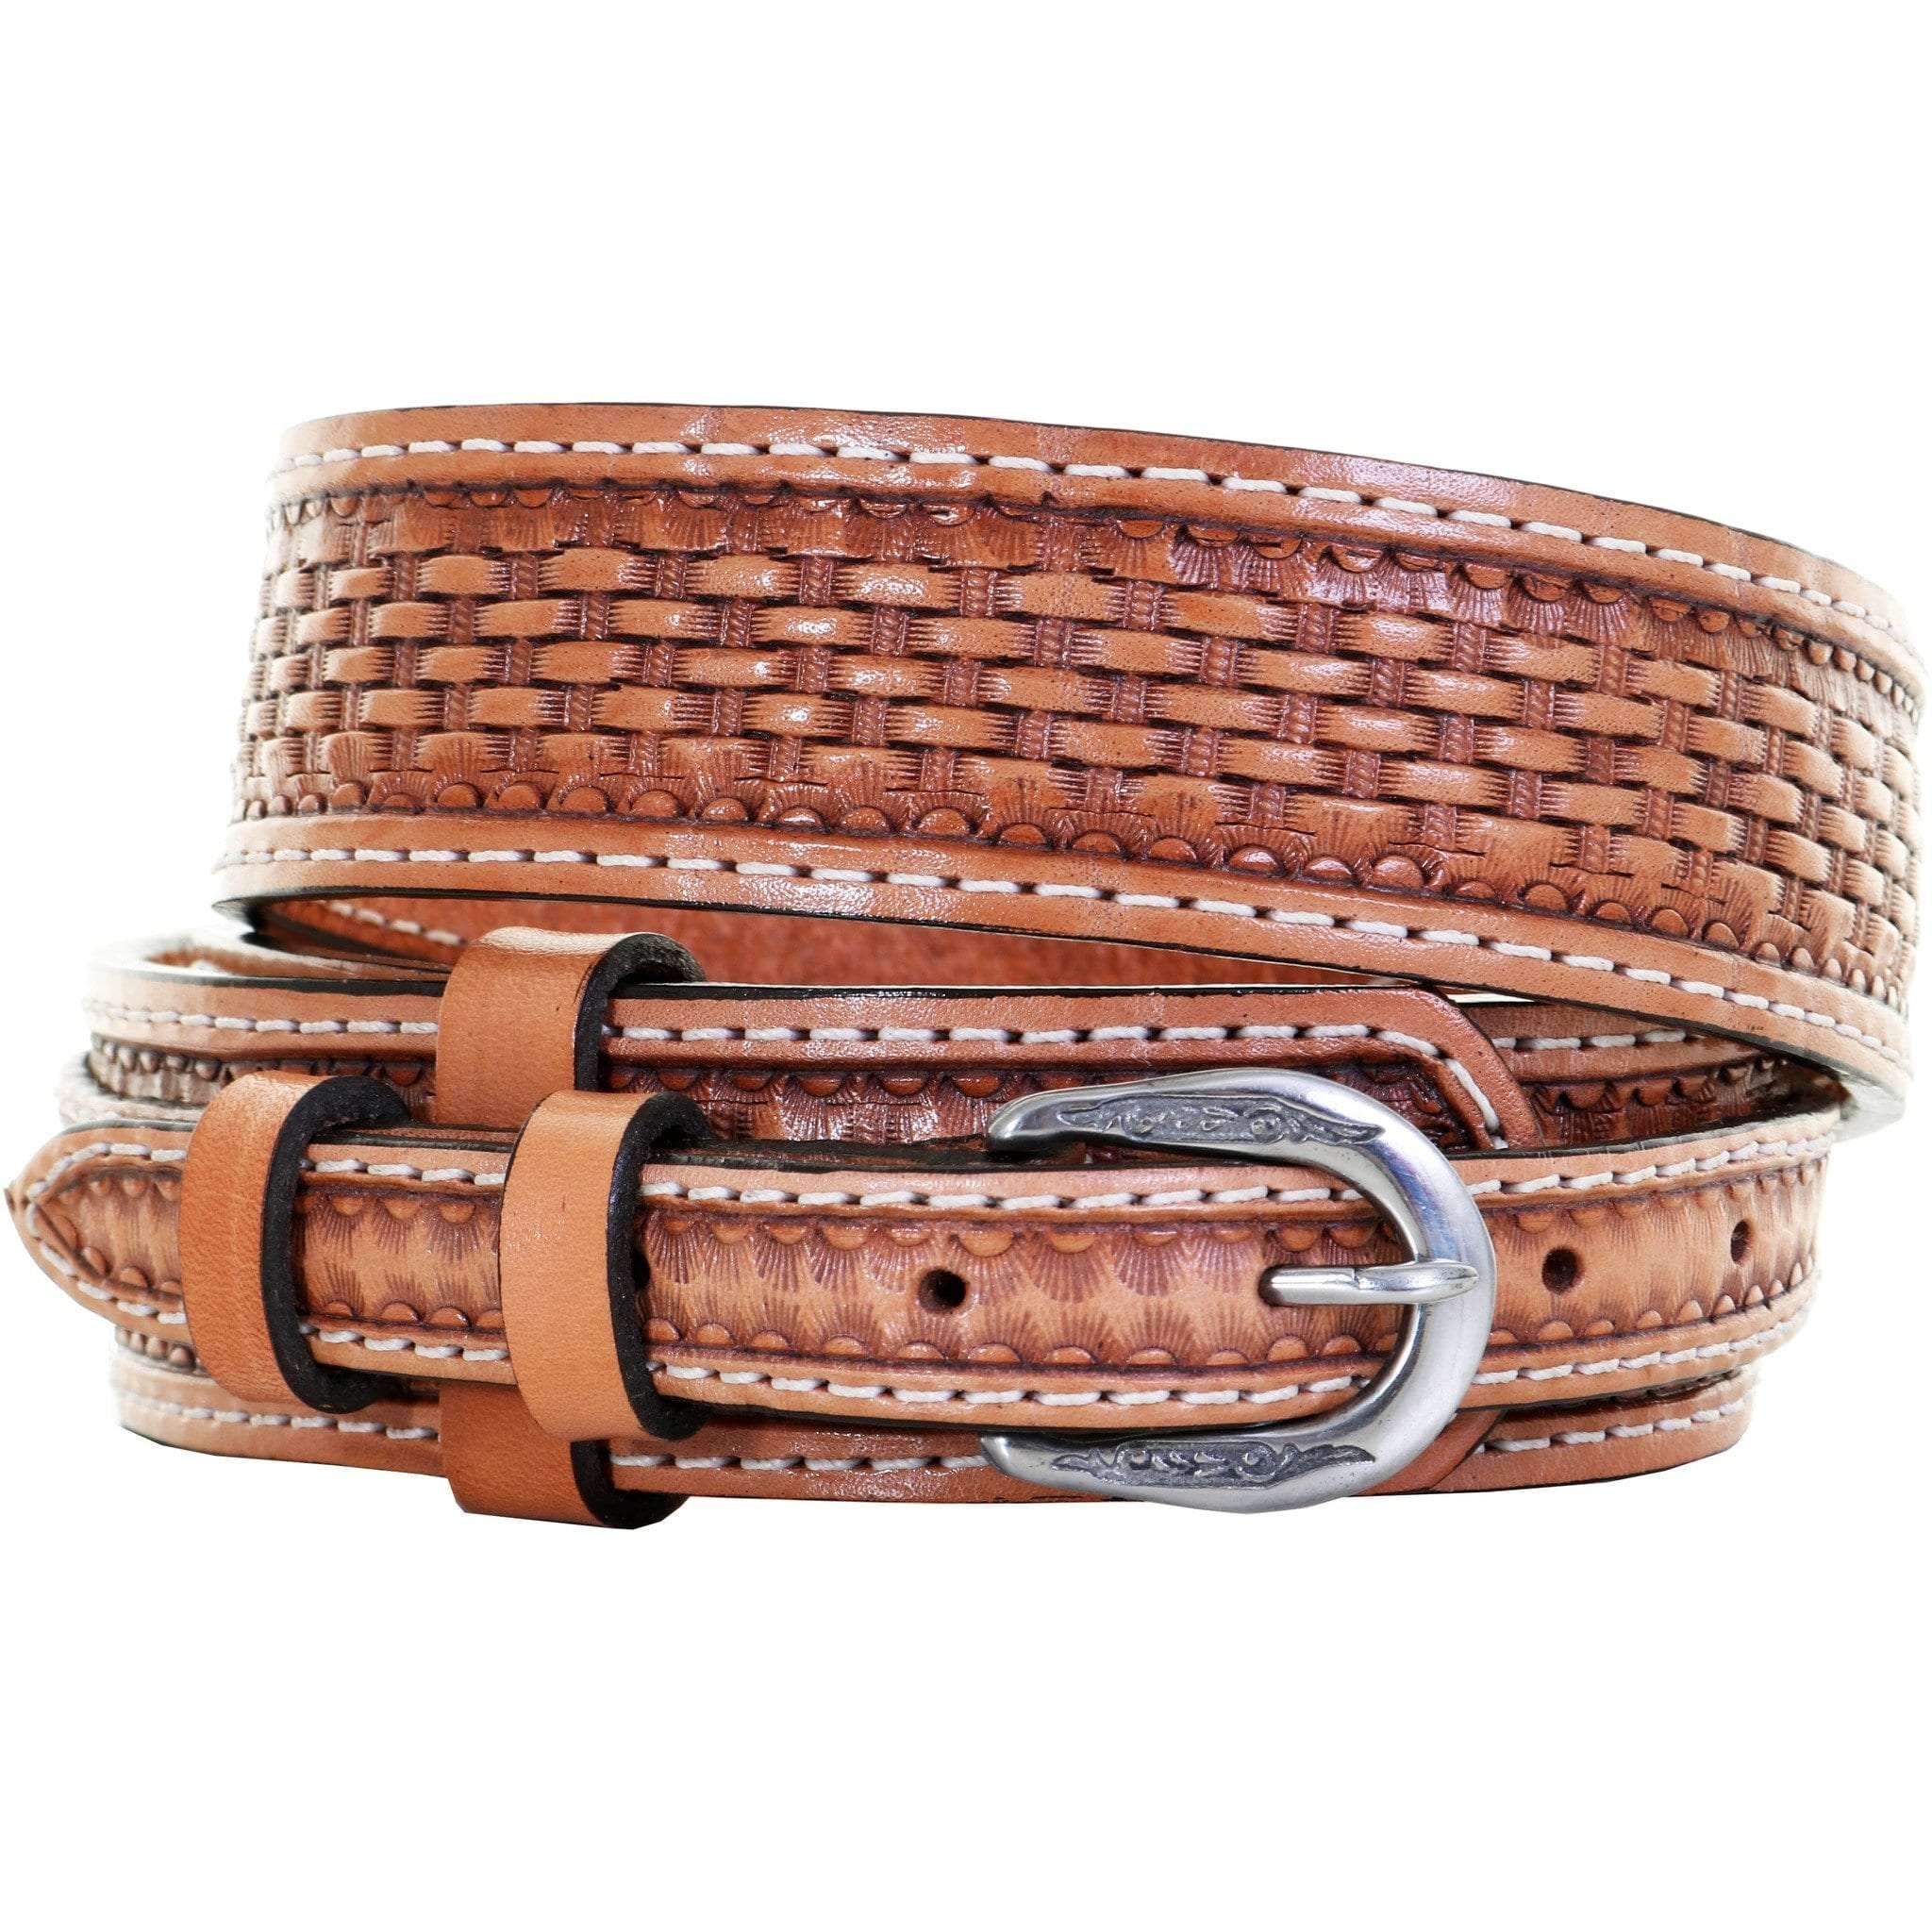 Basket Weave Tooled Leather Covered Belt Buckle Made in the USA perfec –  Whitaker Leather